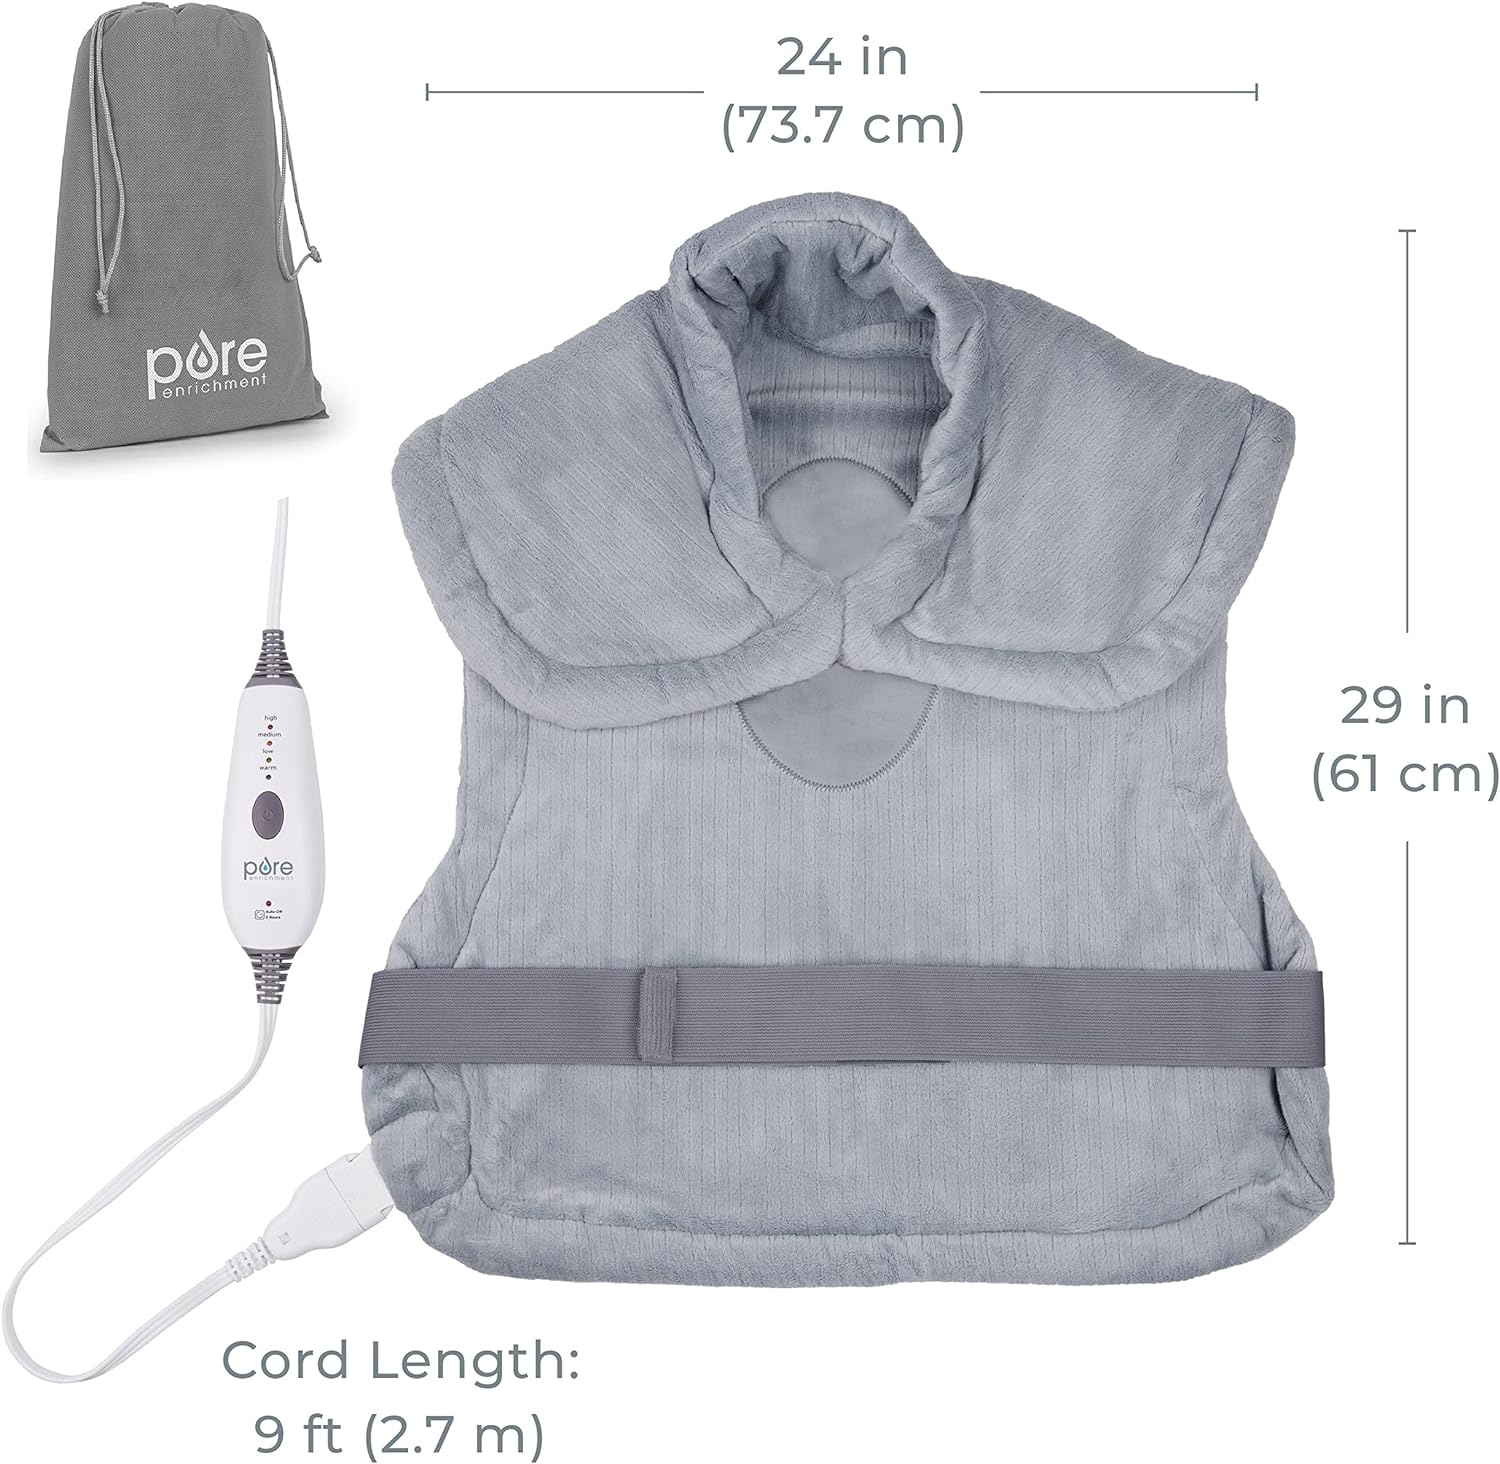 Heating Pad Comparison: Geniani, Sunbeam, Comfier, Pure Enrichment, Weighted Heating Pad